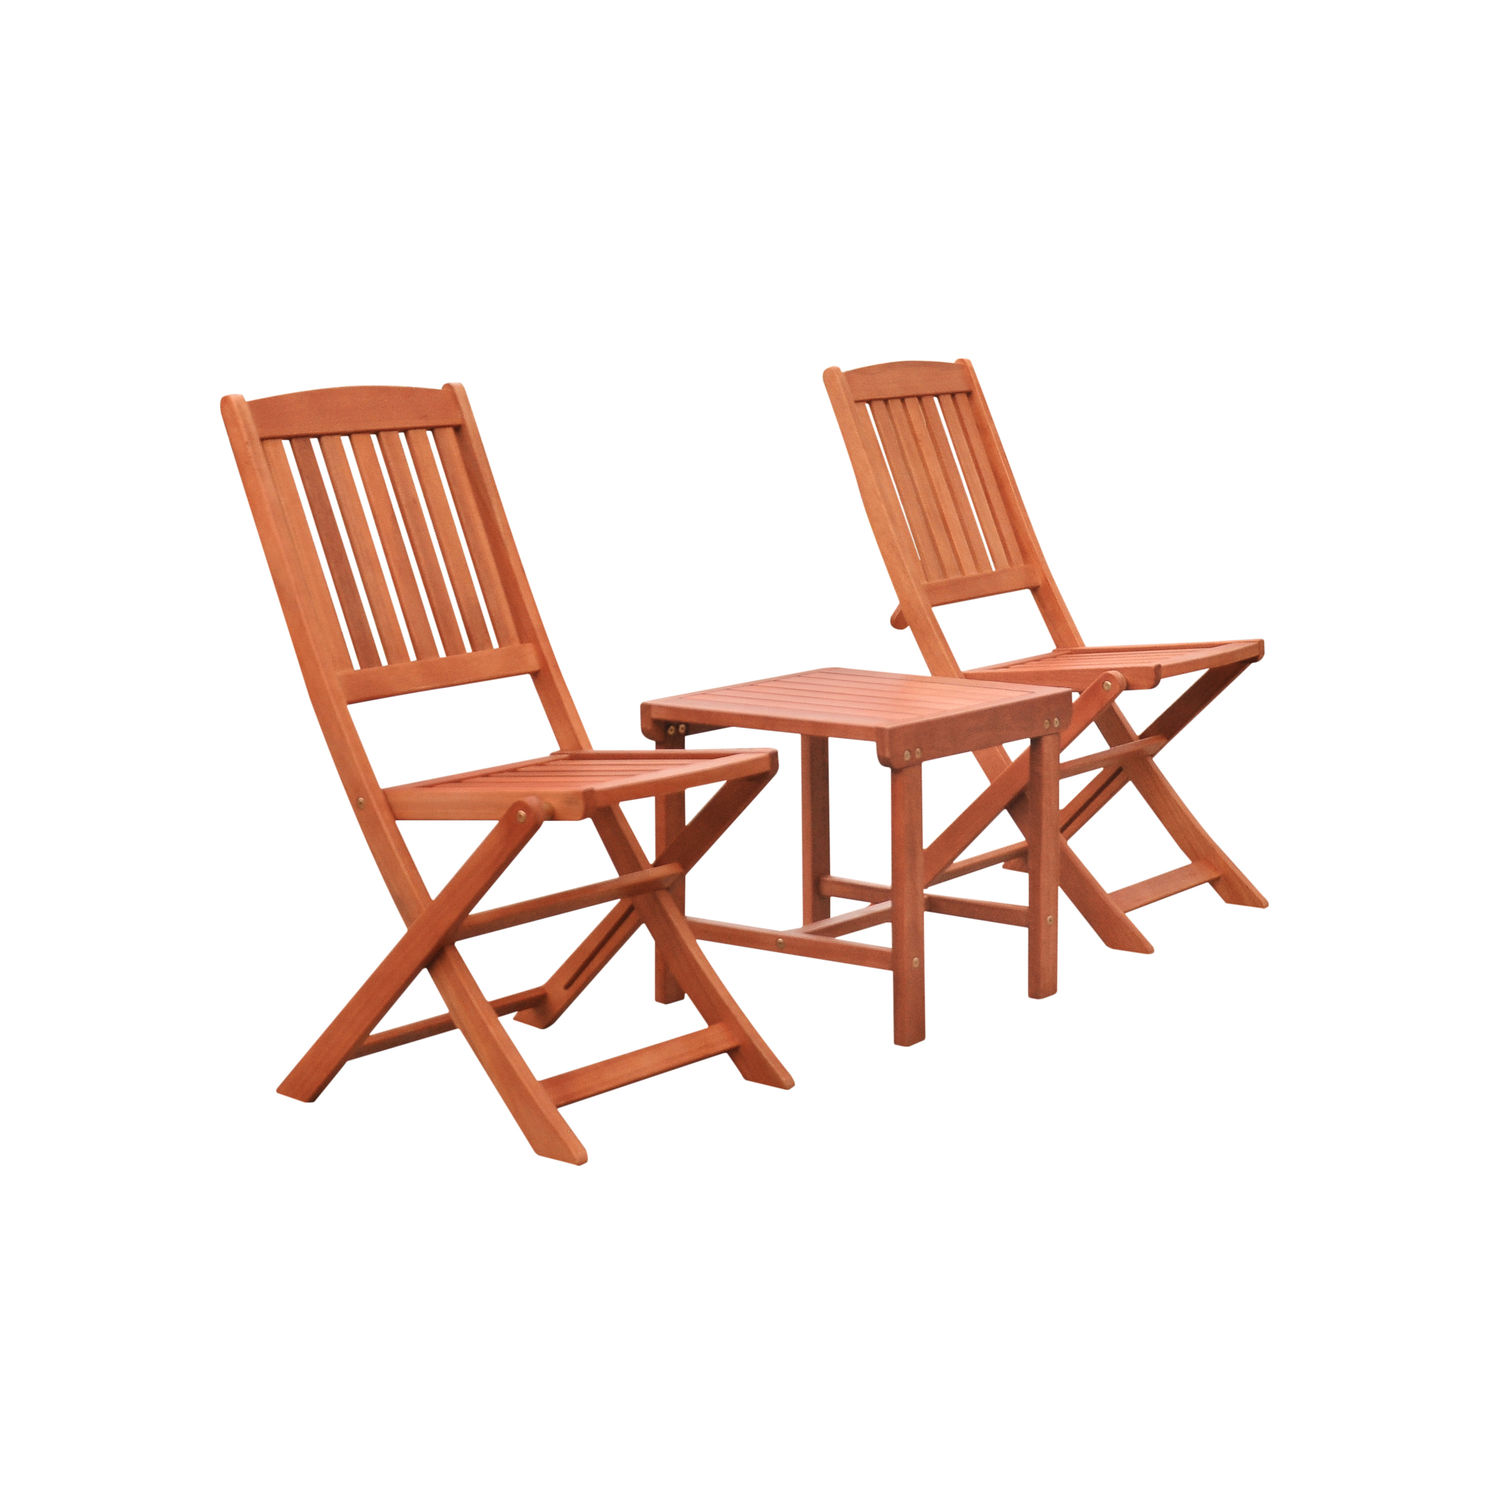 Malibu Outdoor Patio 3-Piece Wood Dining Set with Folding Chair